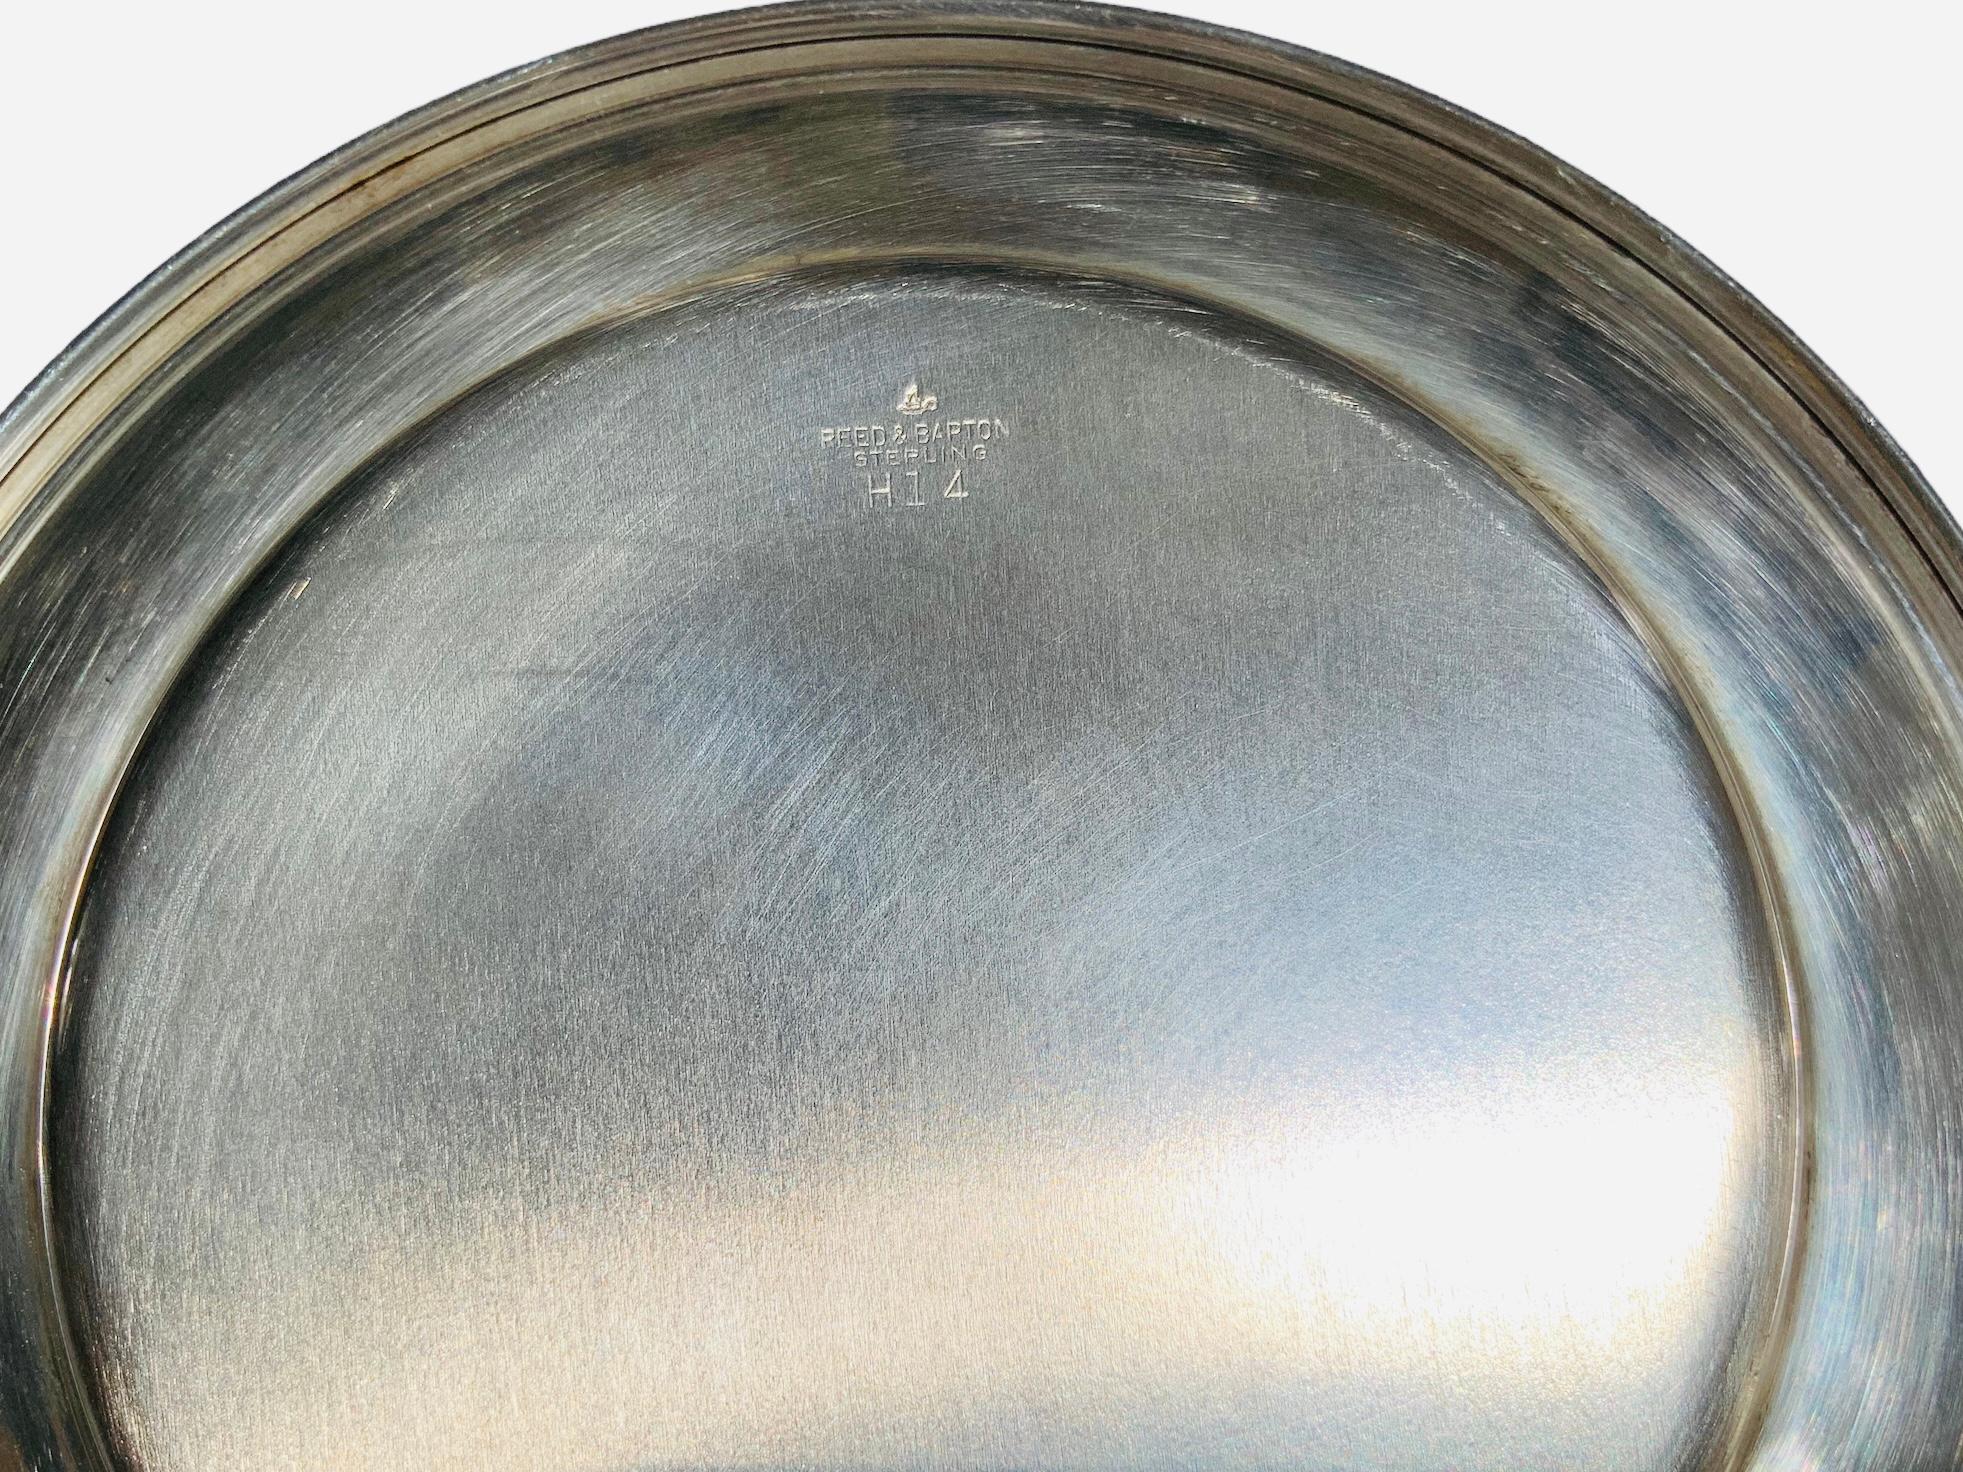 This is a Reed and Barton Sterling Silver Round Plate. This small plate can be used for appetizers or bread. It is hallmarked Reed & Barton Sterling H 14 in the back of the plate.